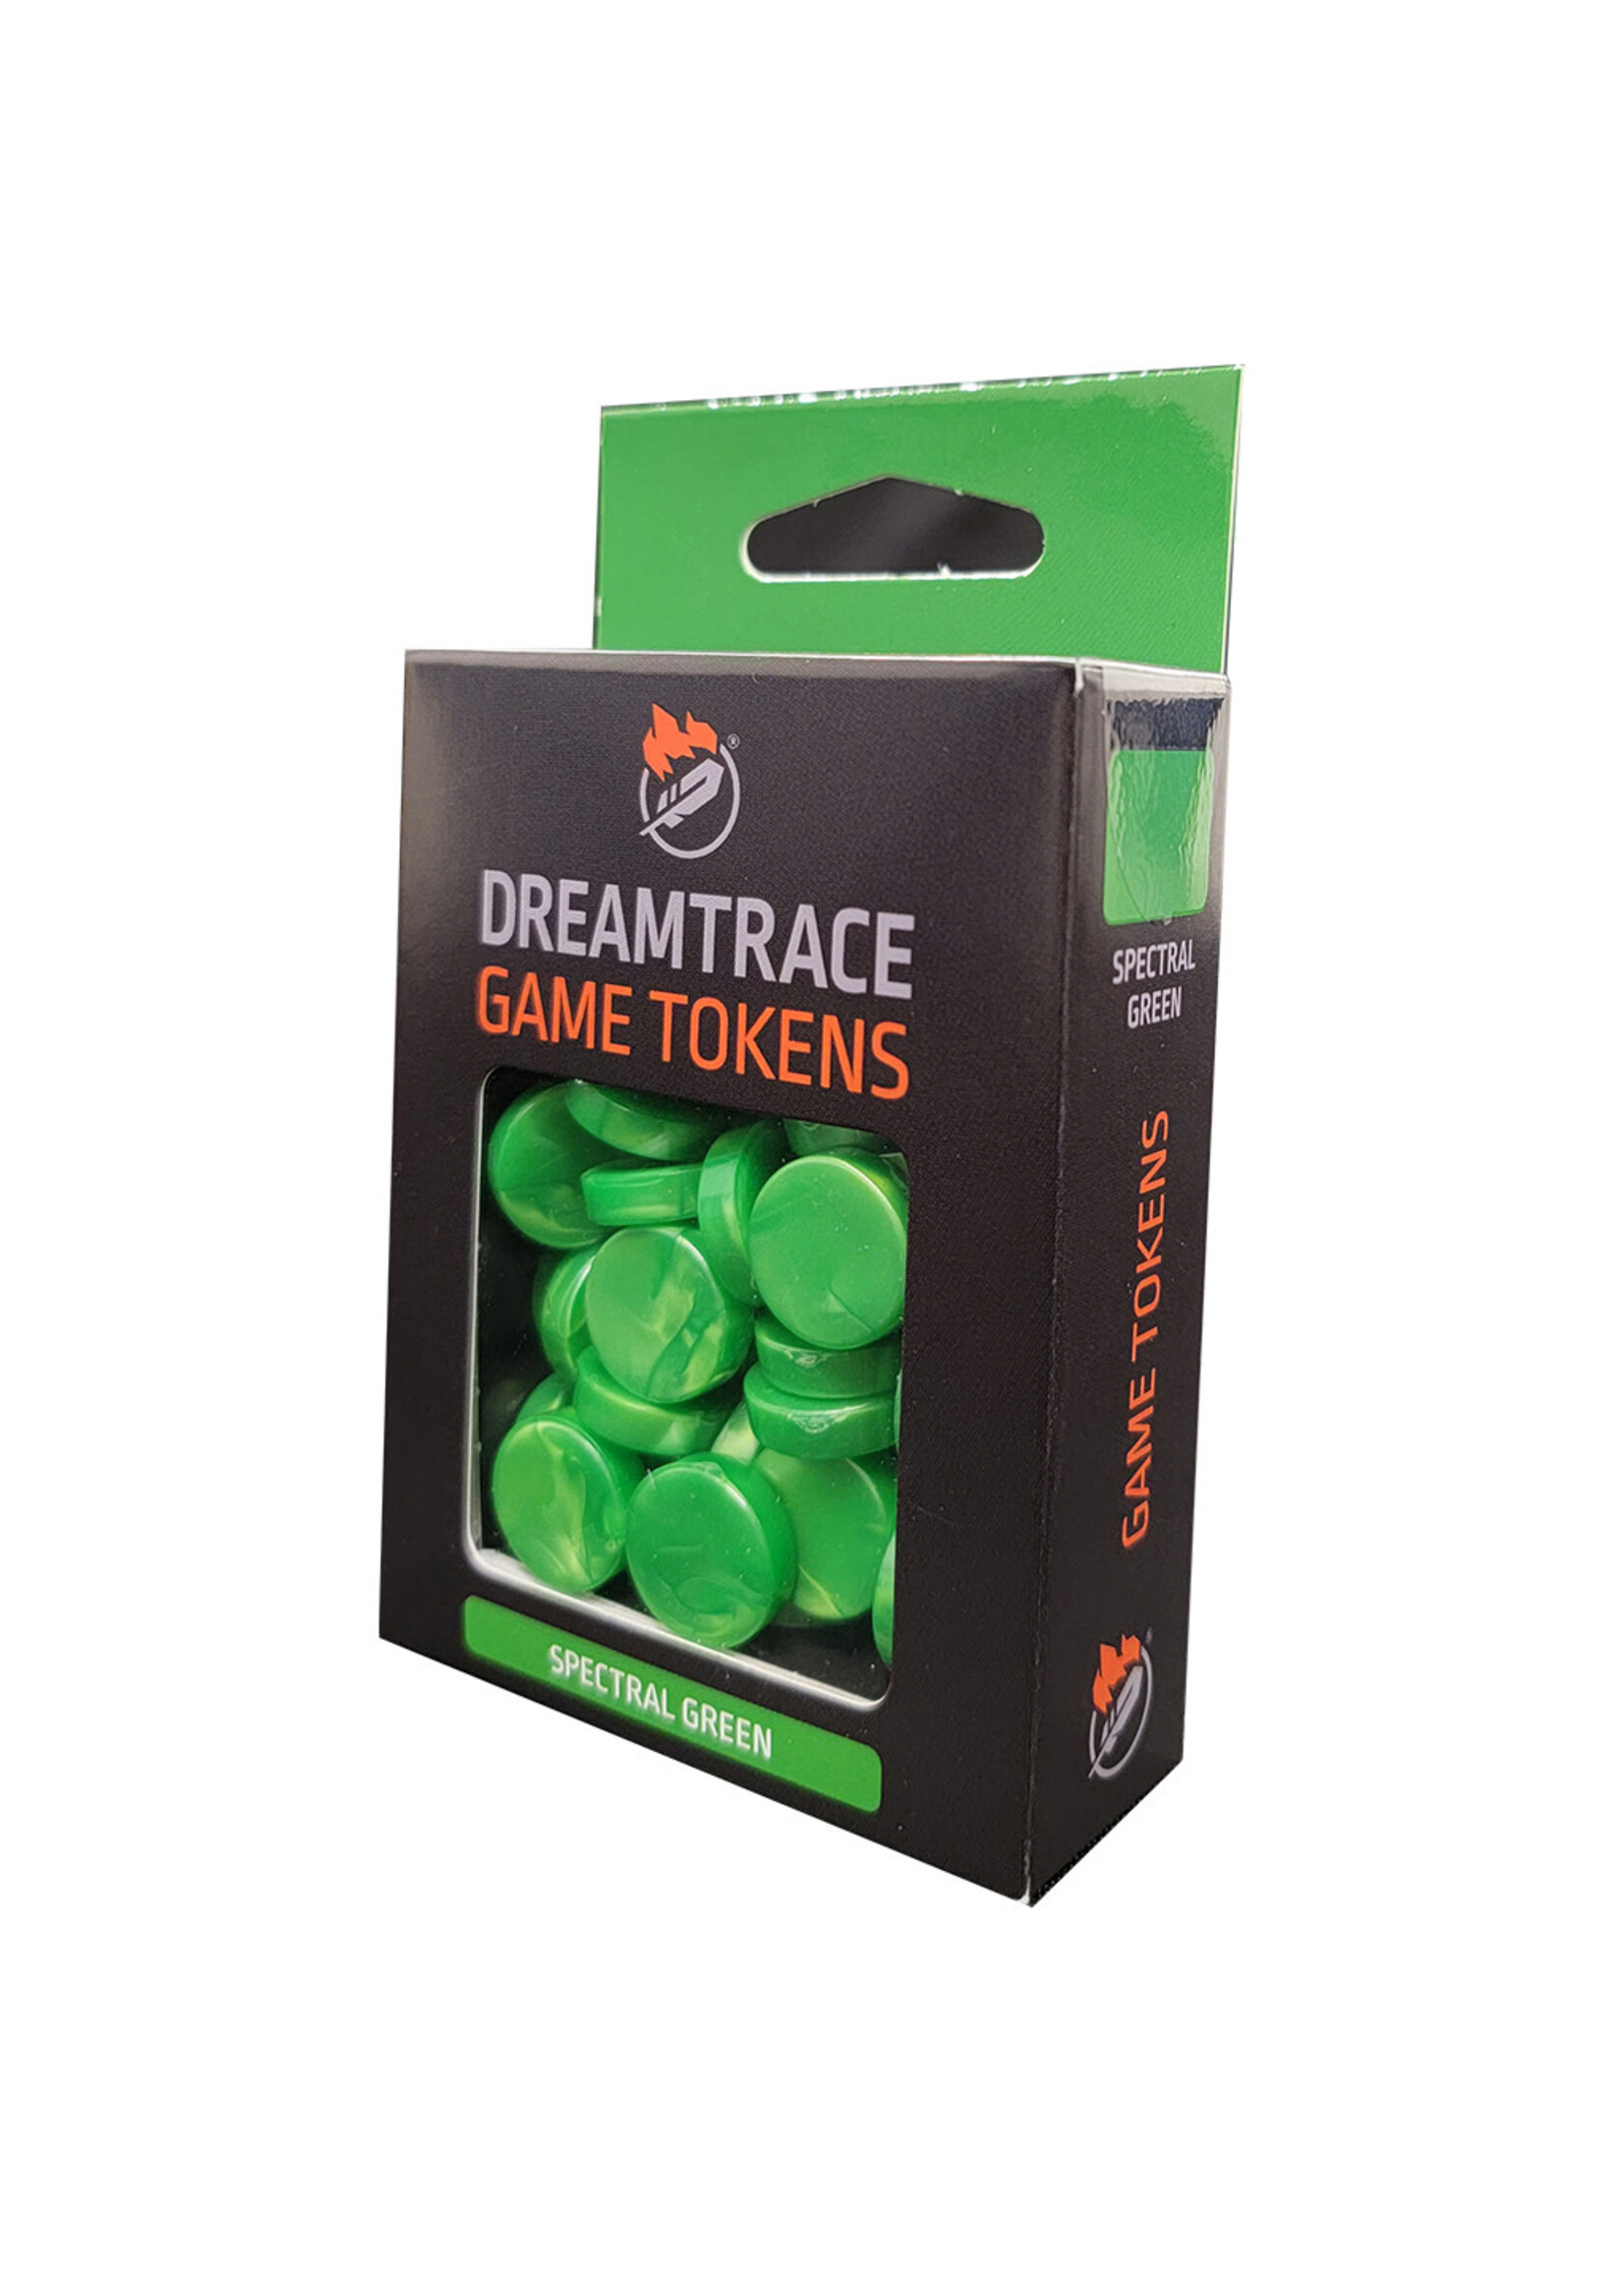 Ghost Galaxy DreamTrace Gaming Tokens: Spectral Green